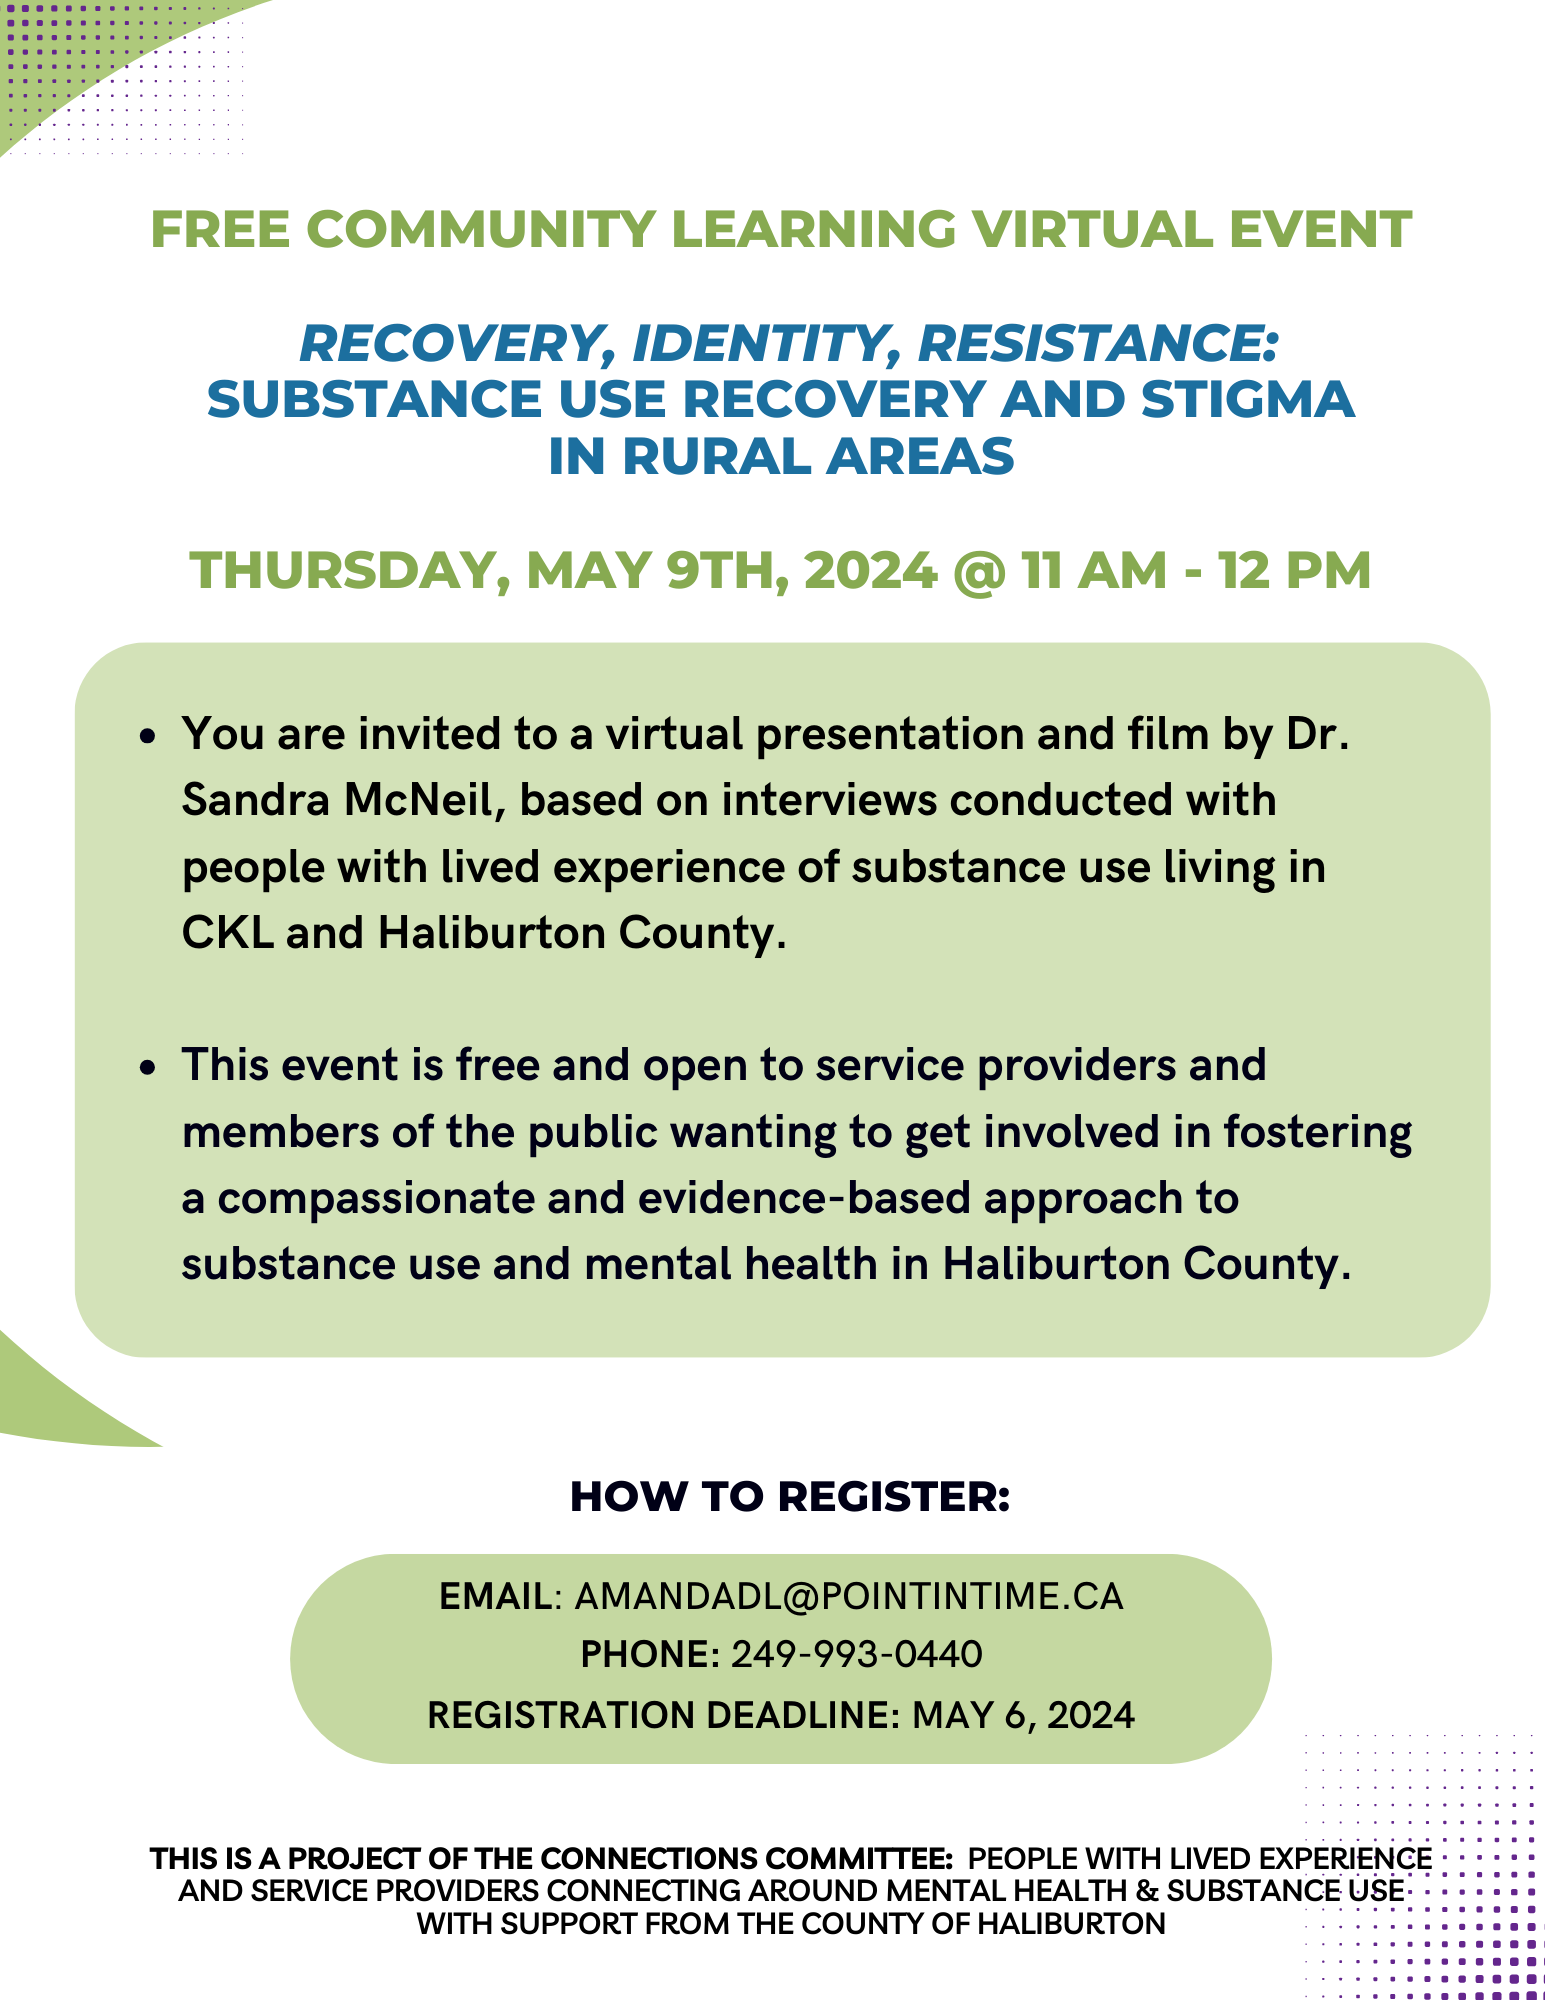 Recovery, Identity, Resistance poster advertising virtual event on May 9 from 11 - 12 p.m. To sign up email amandadl@pointintime.ca